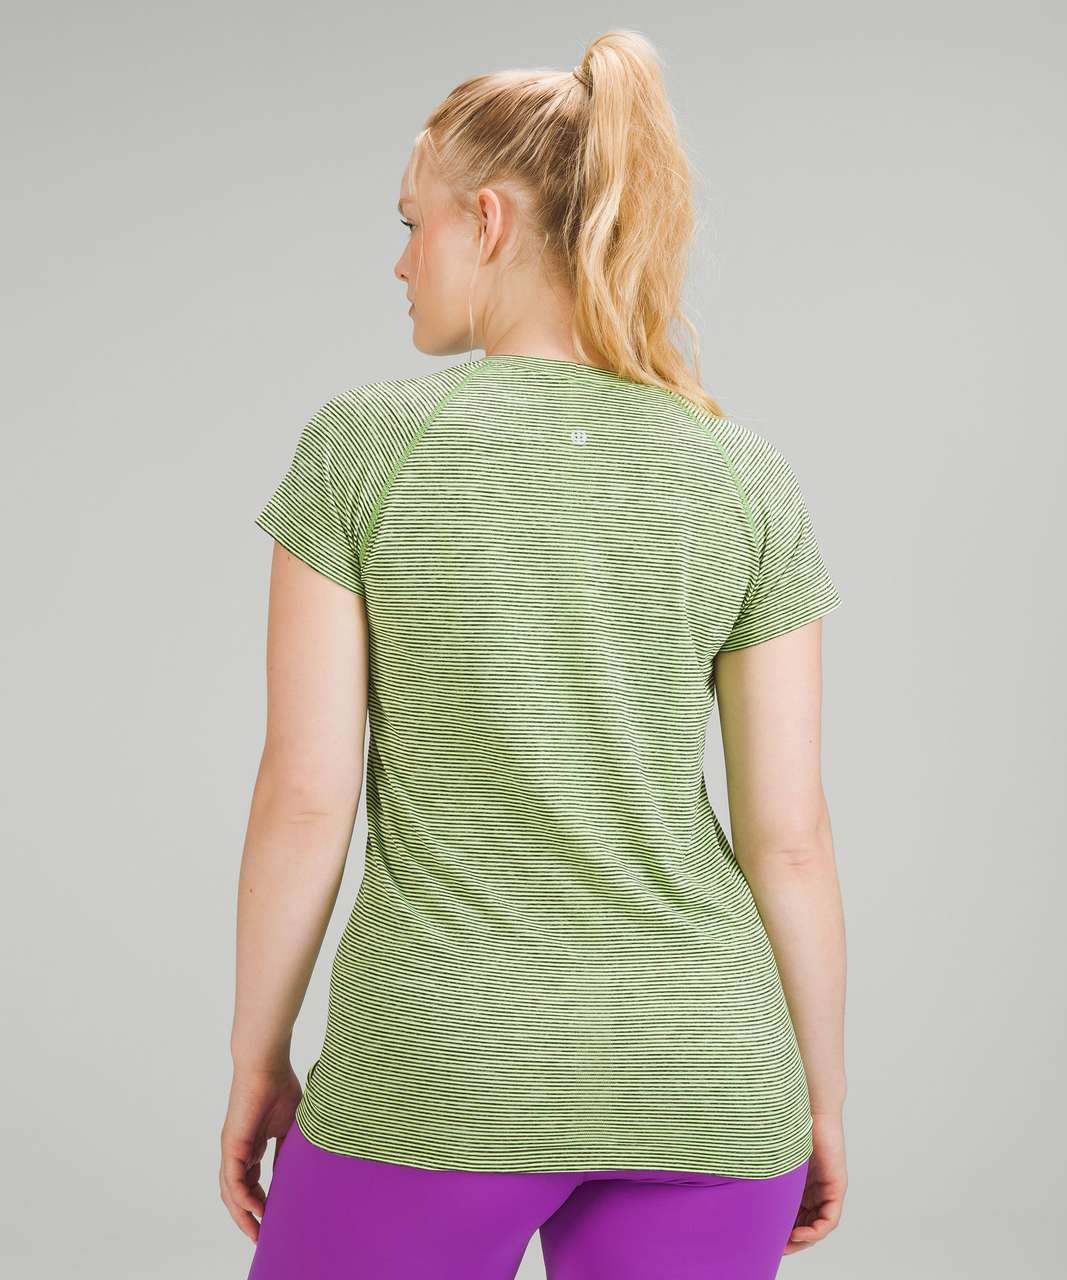 Lululemon Swiftly Tech Short Sleeve Shirt 2.0 - Wee Are From Space Faded Zap